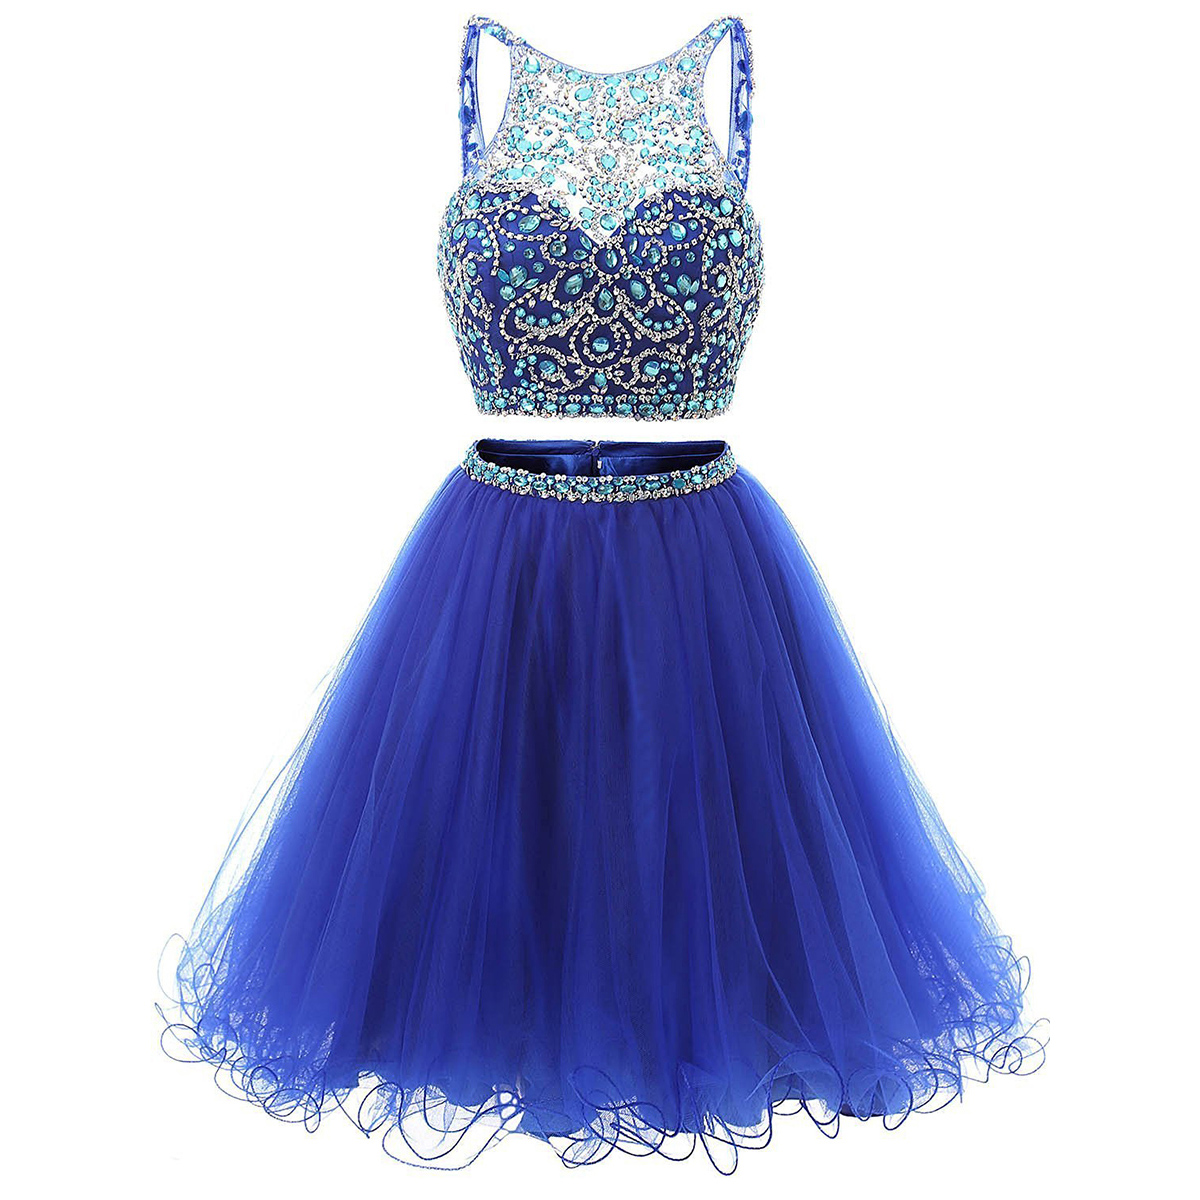 Royal Blue Crystals And Sequins Embellished Short Two-Piece Homecoming